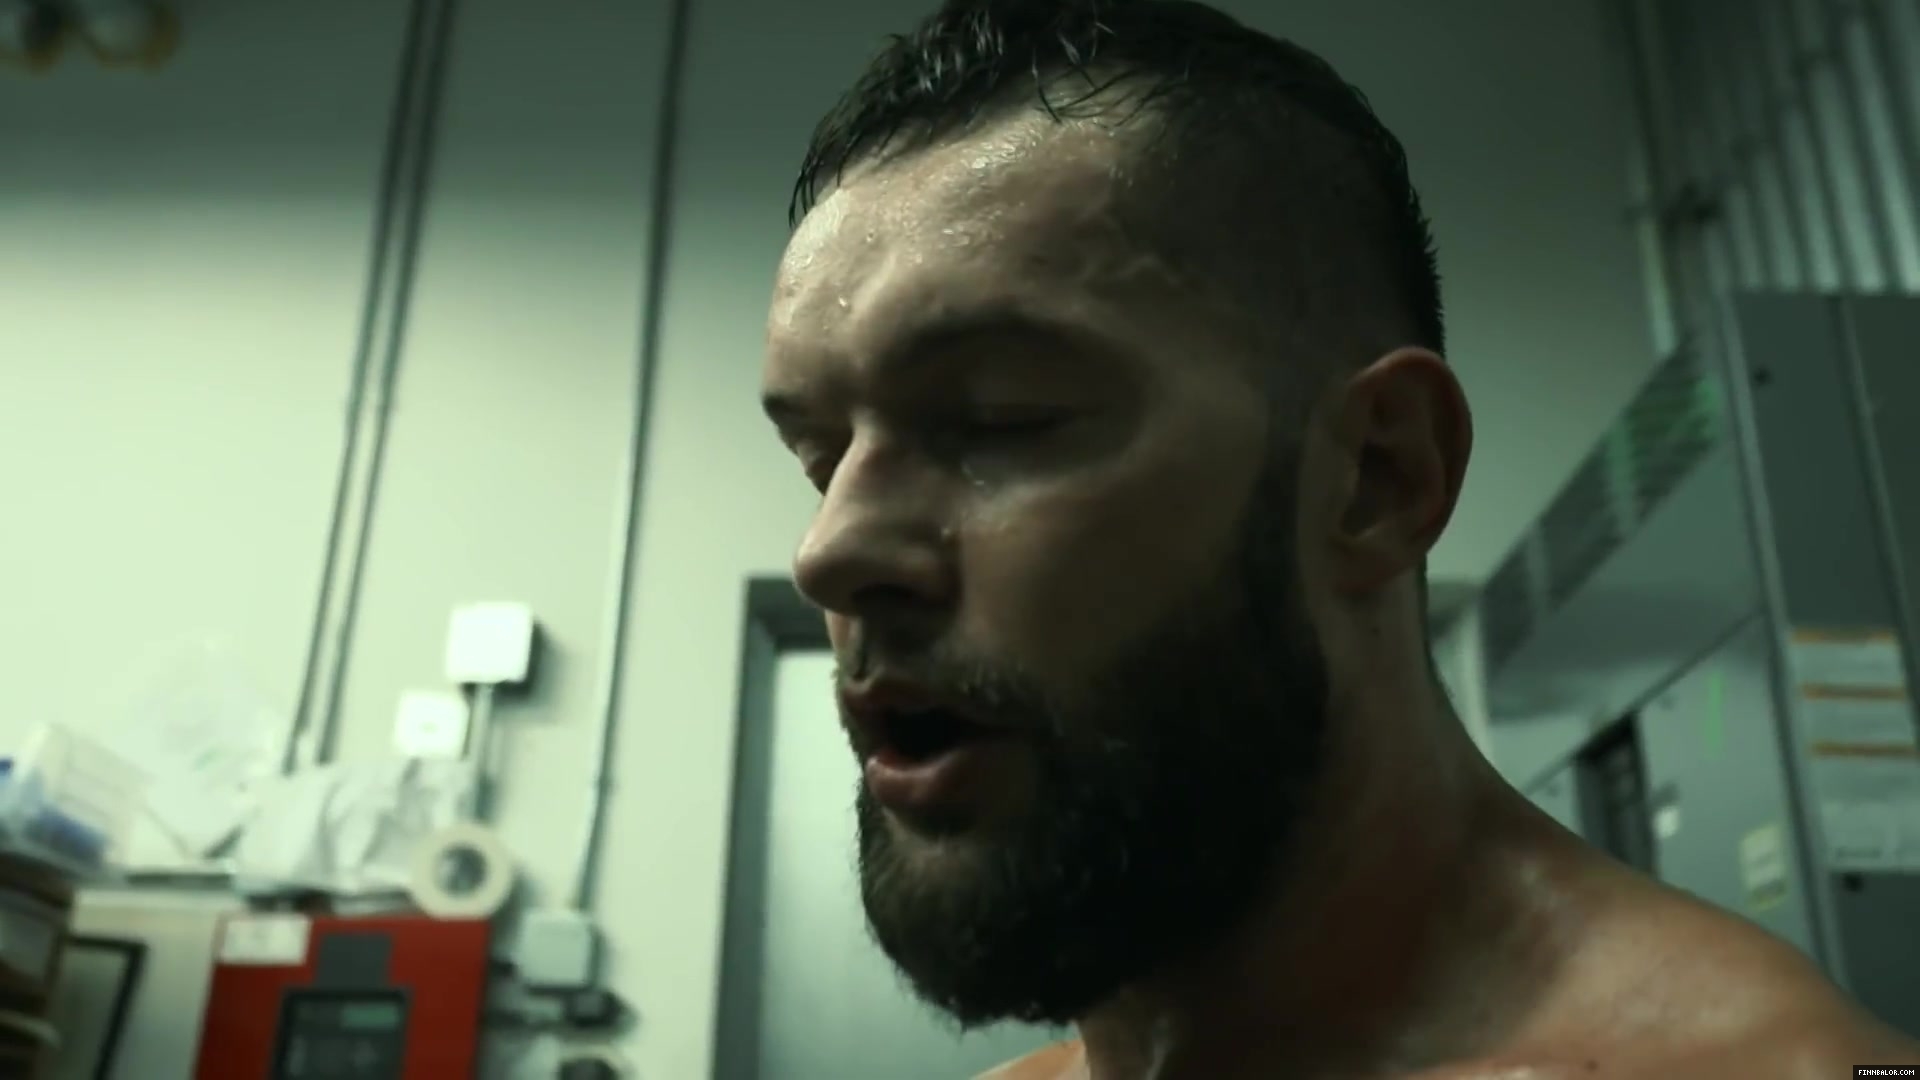 Finn_Balor___The_Rising_of_the_Prince_in_NXT_247.jpg